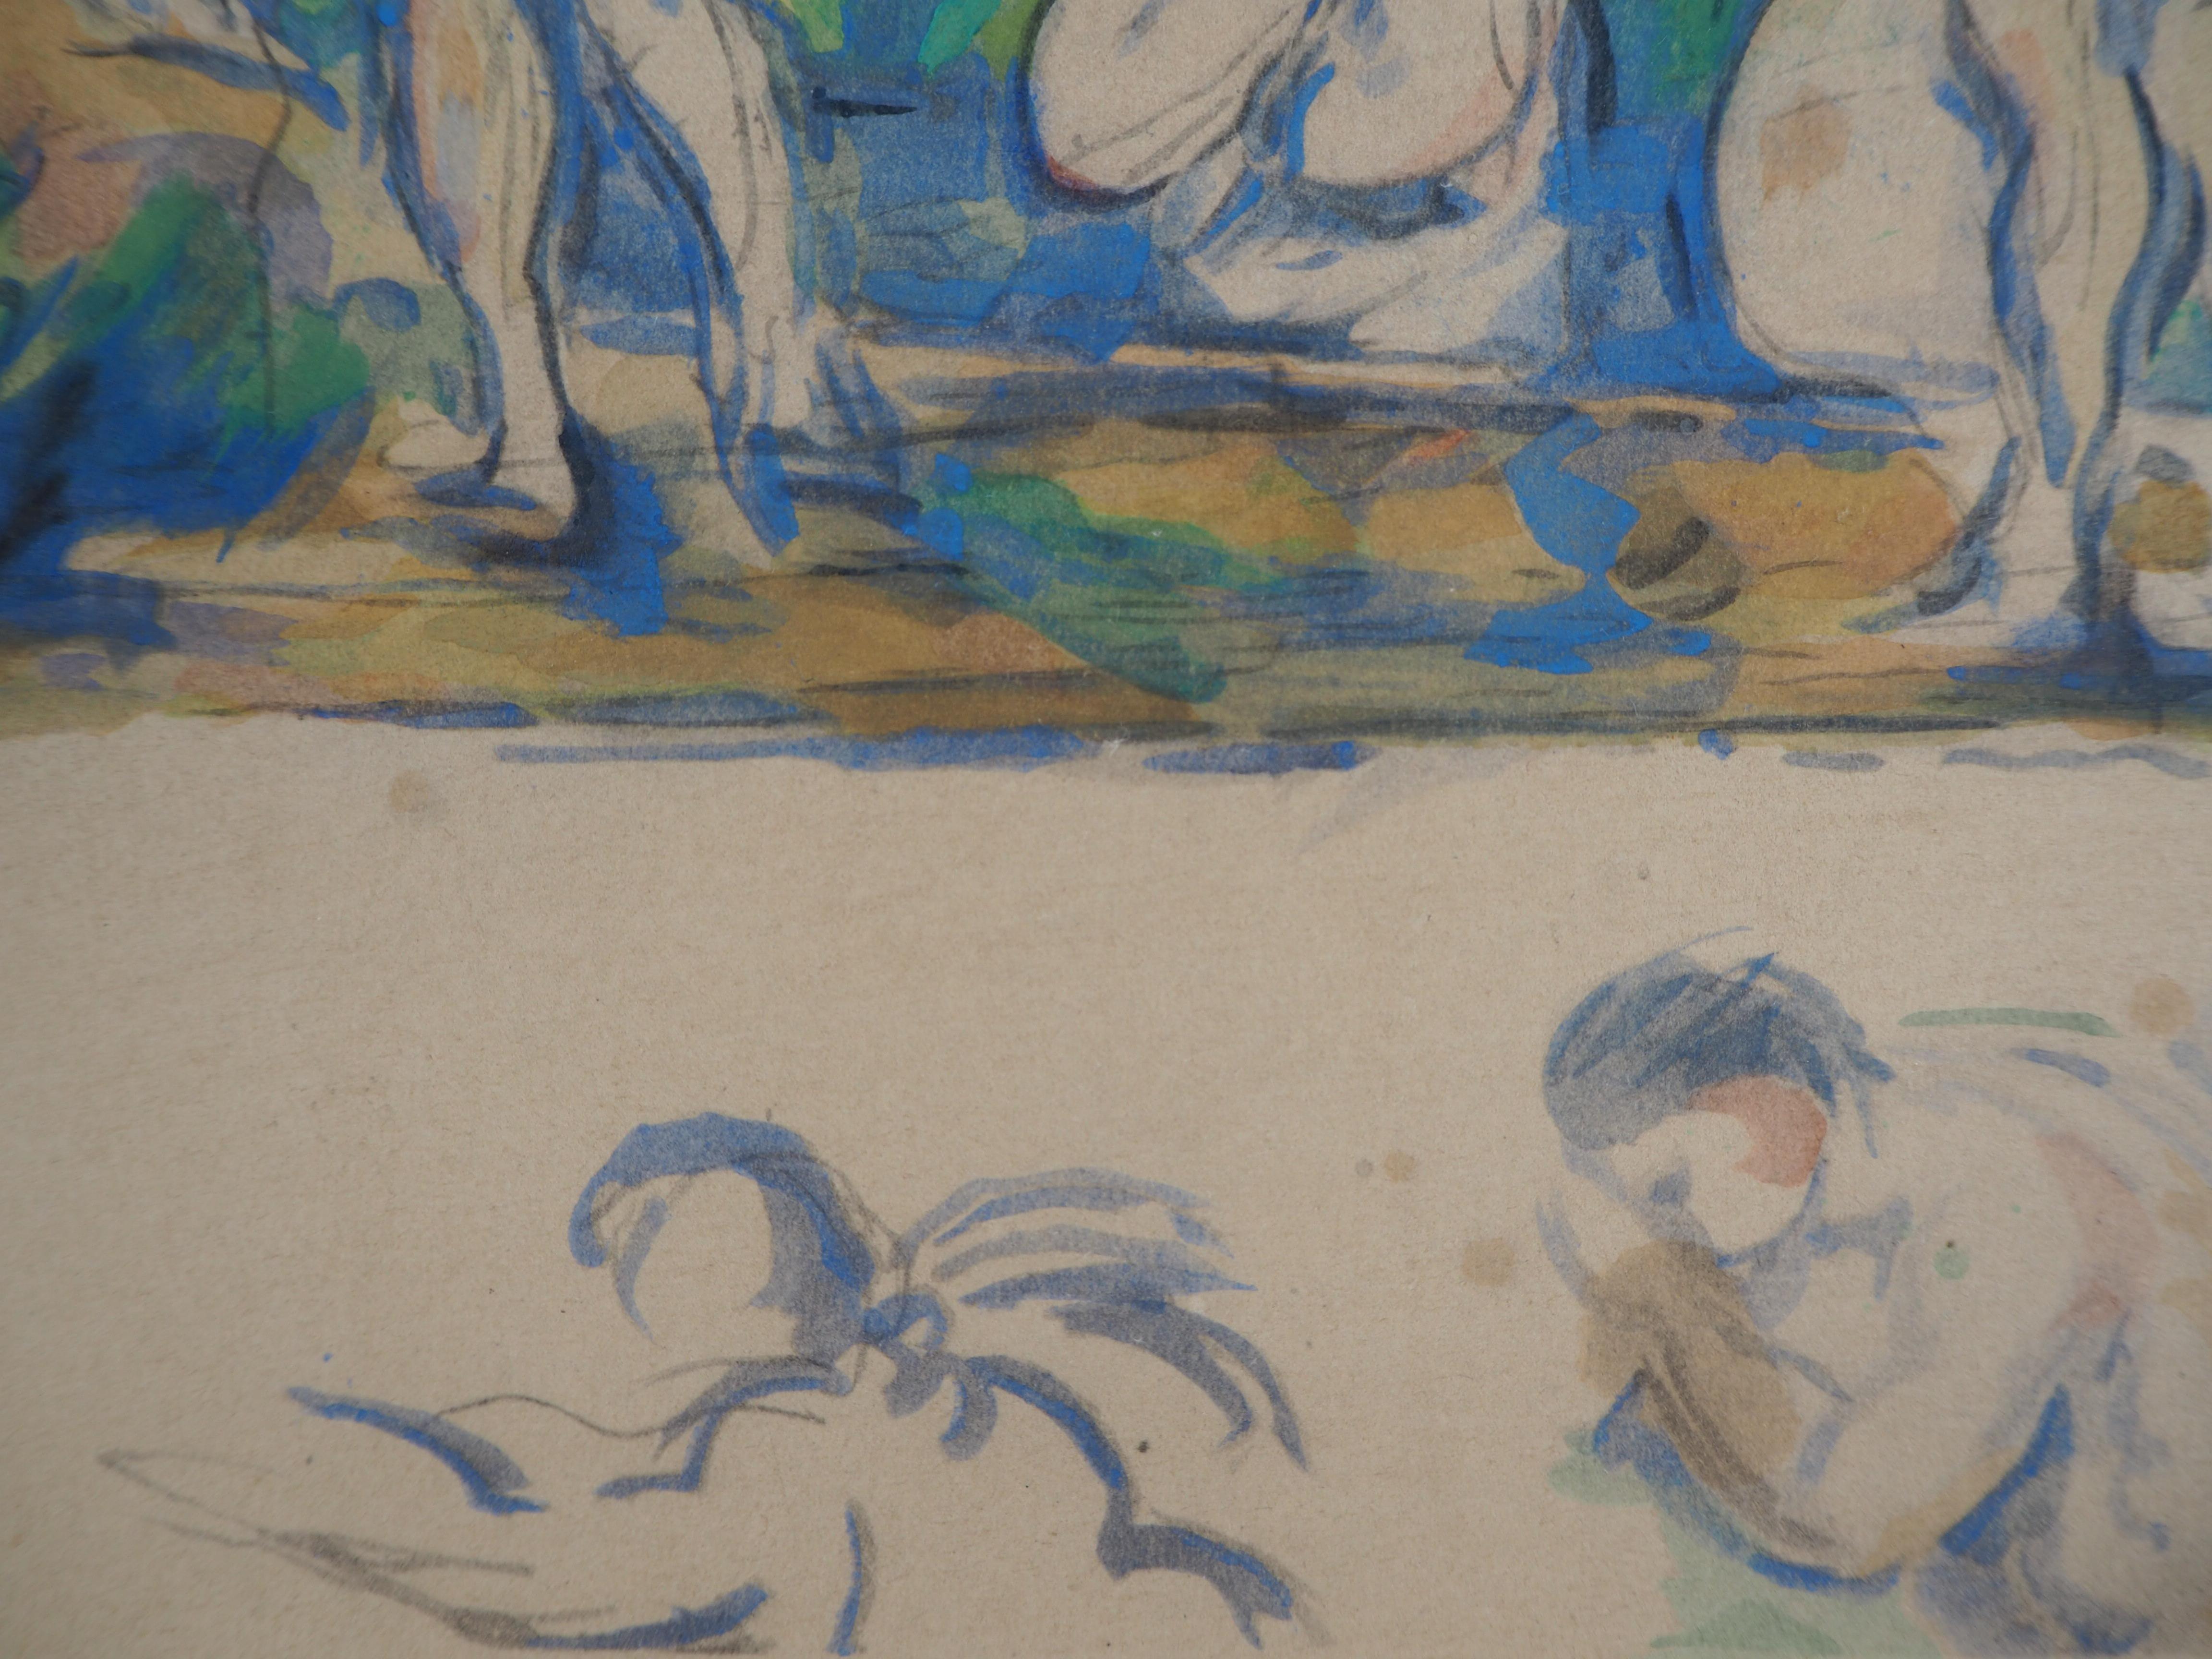 Bathers in a Landscape and Studies - Lithograph and Stencil Watercolor, 1947 2